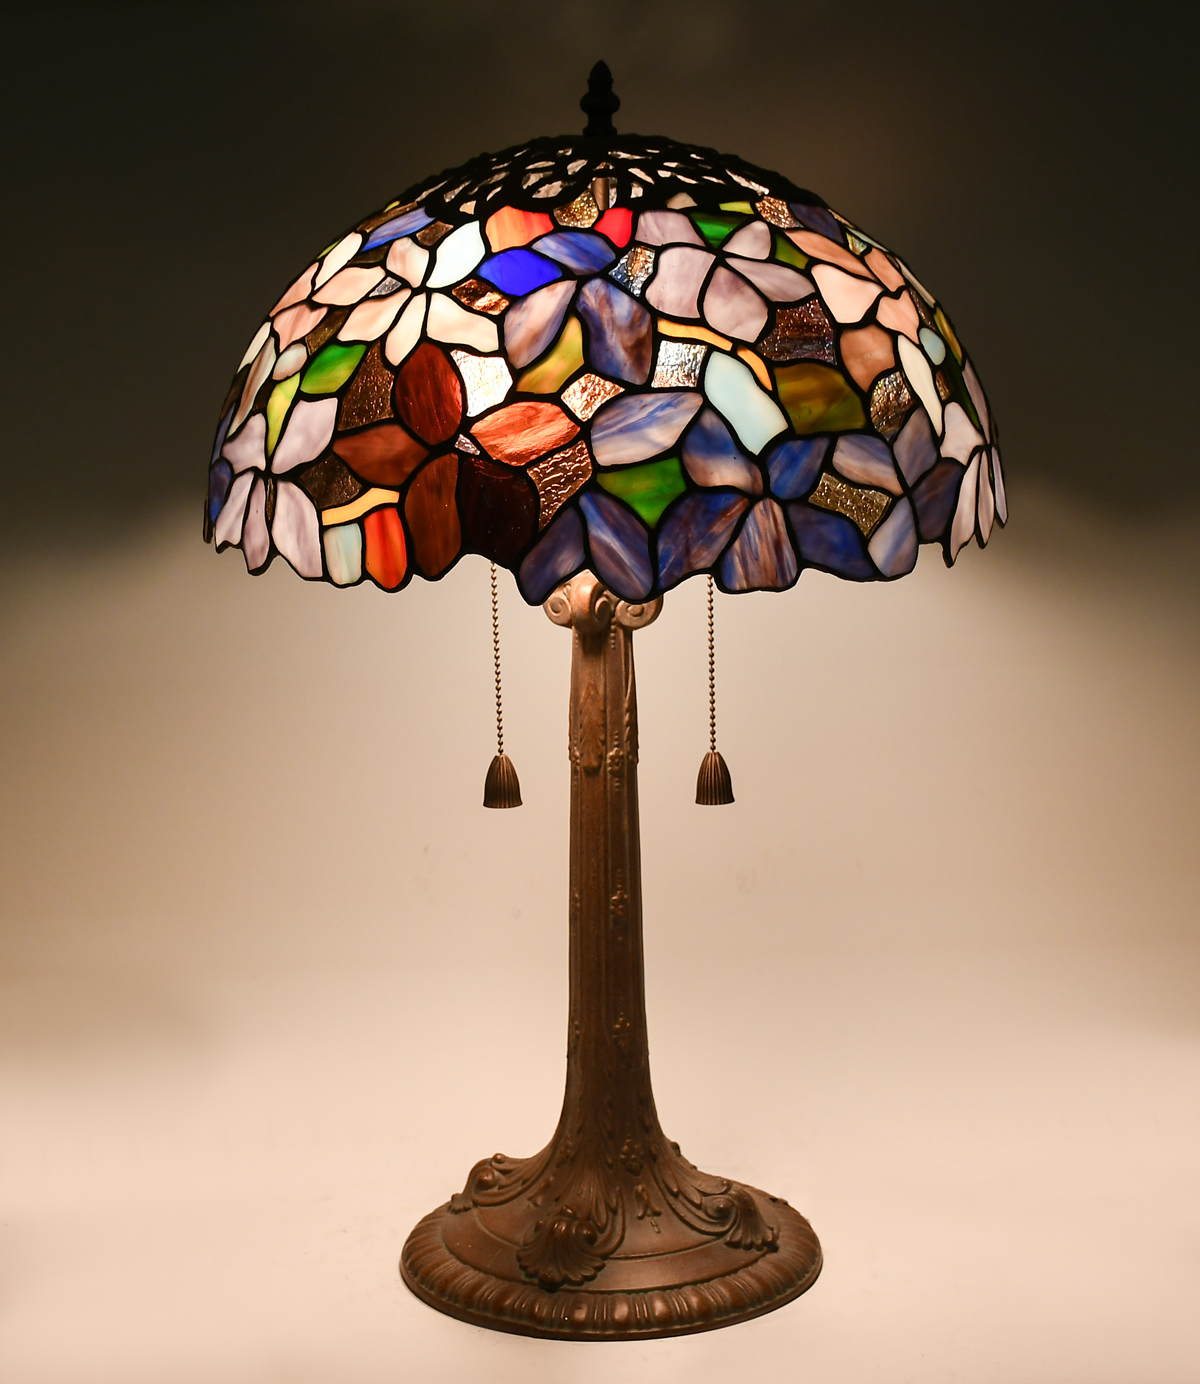 STAINED GLASS FLORAL LAMP: Colorful